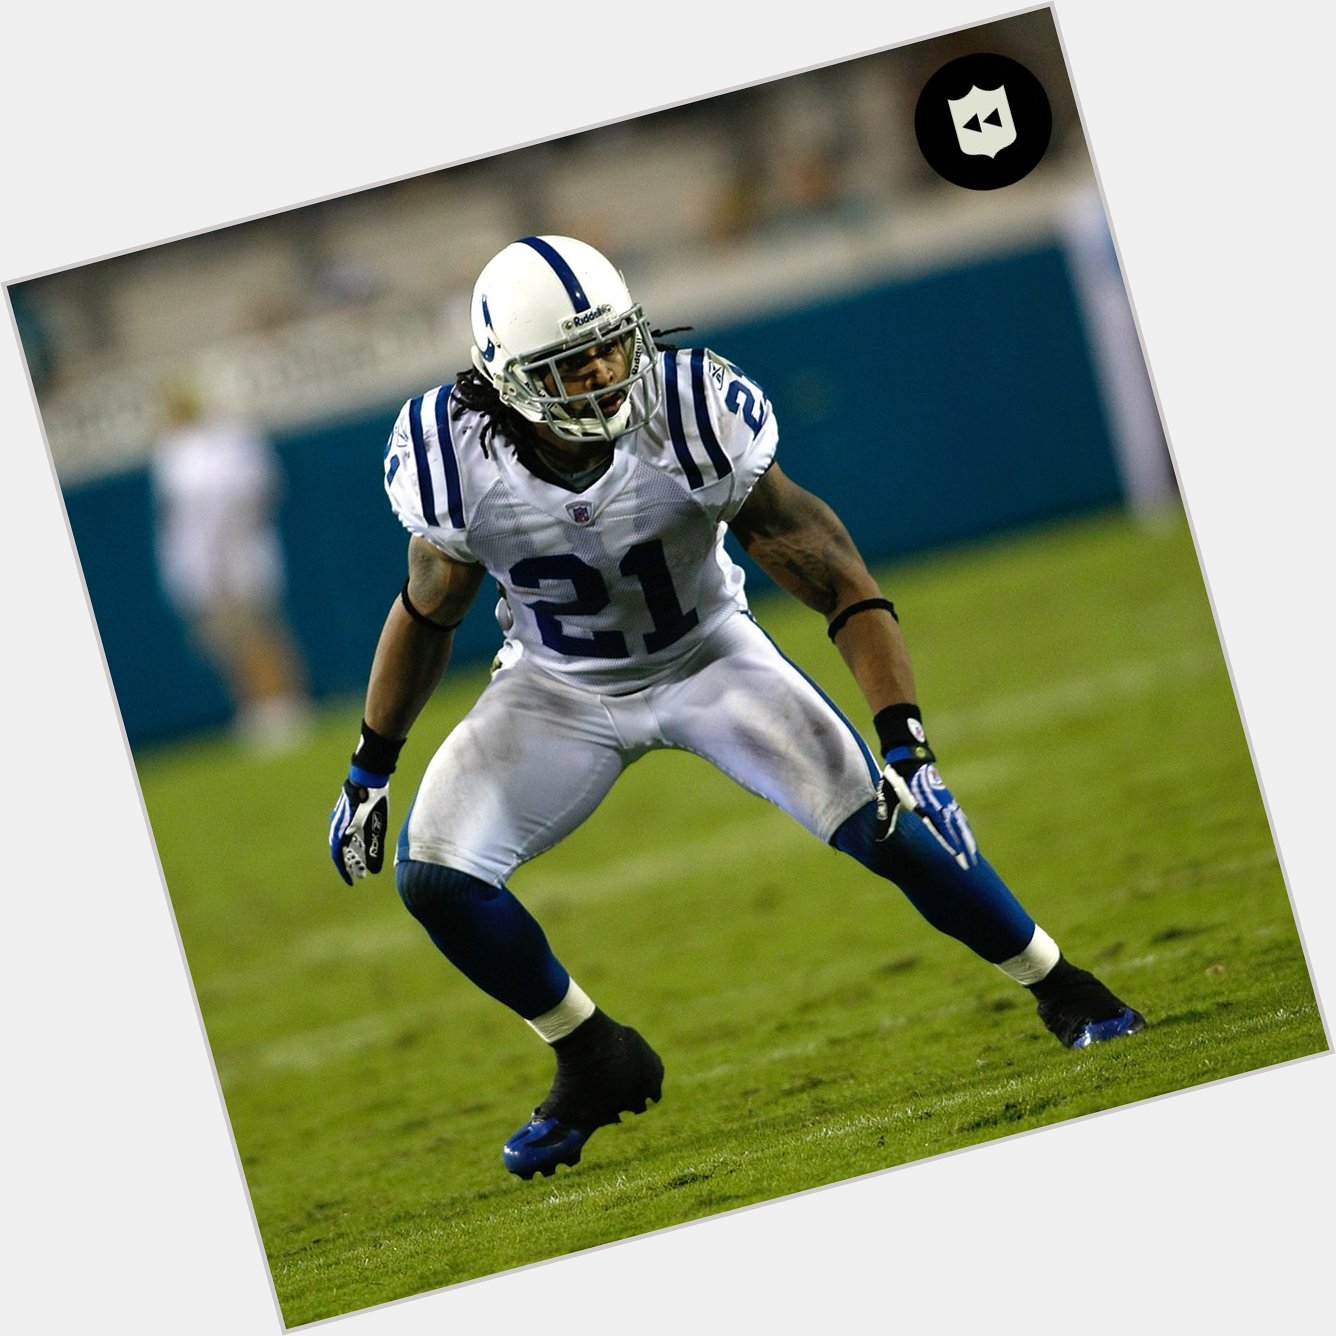 Wishing 2007 Defensive Player of the Year Bob Sanders a happy 40th birthday! 